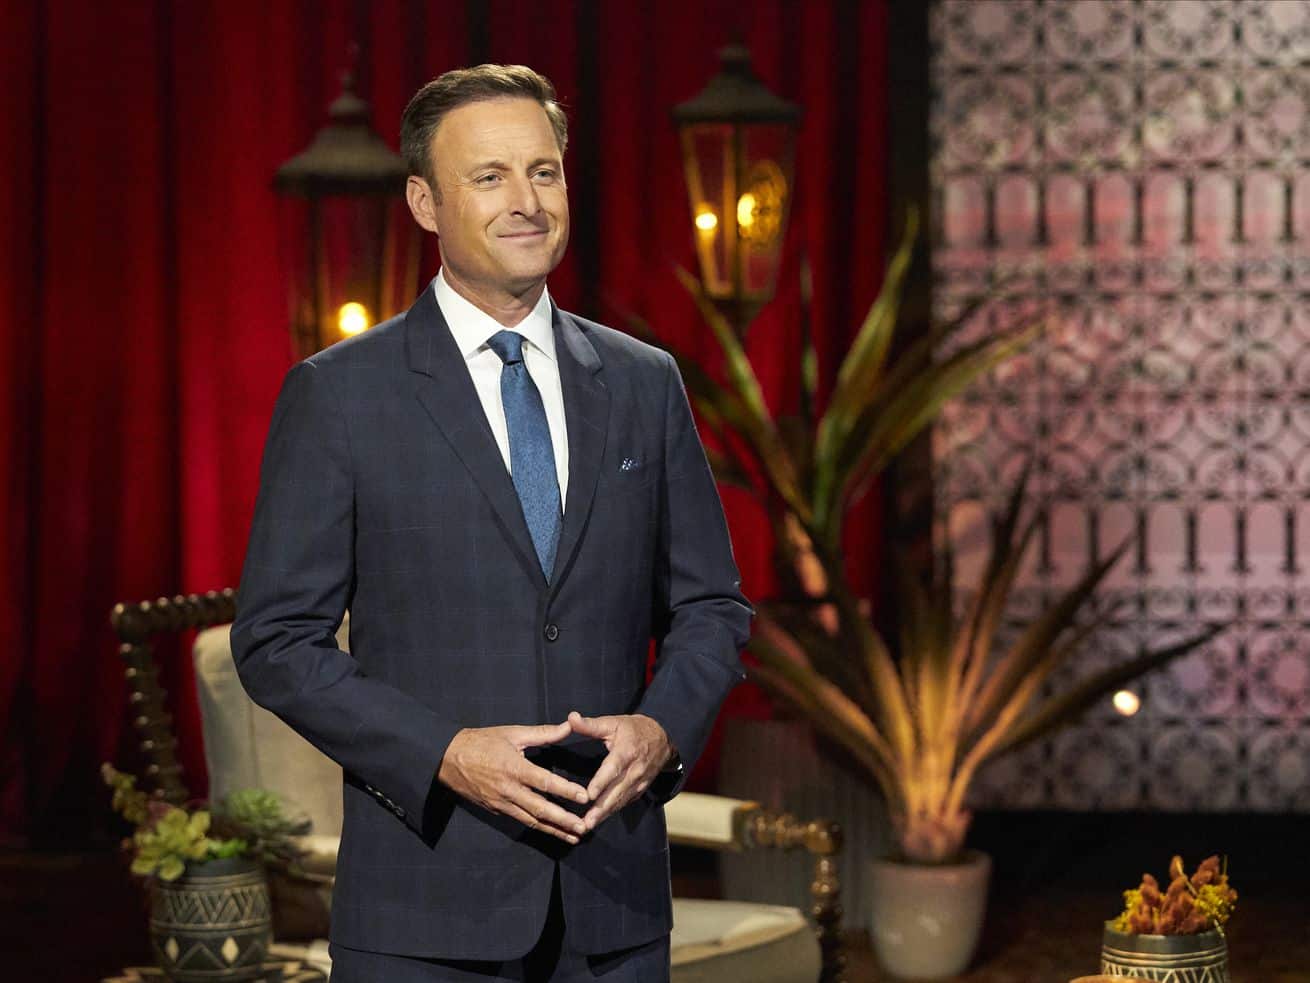 The Bachelor’s messy, uneven, and long-overdue reckoning with racism, explained